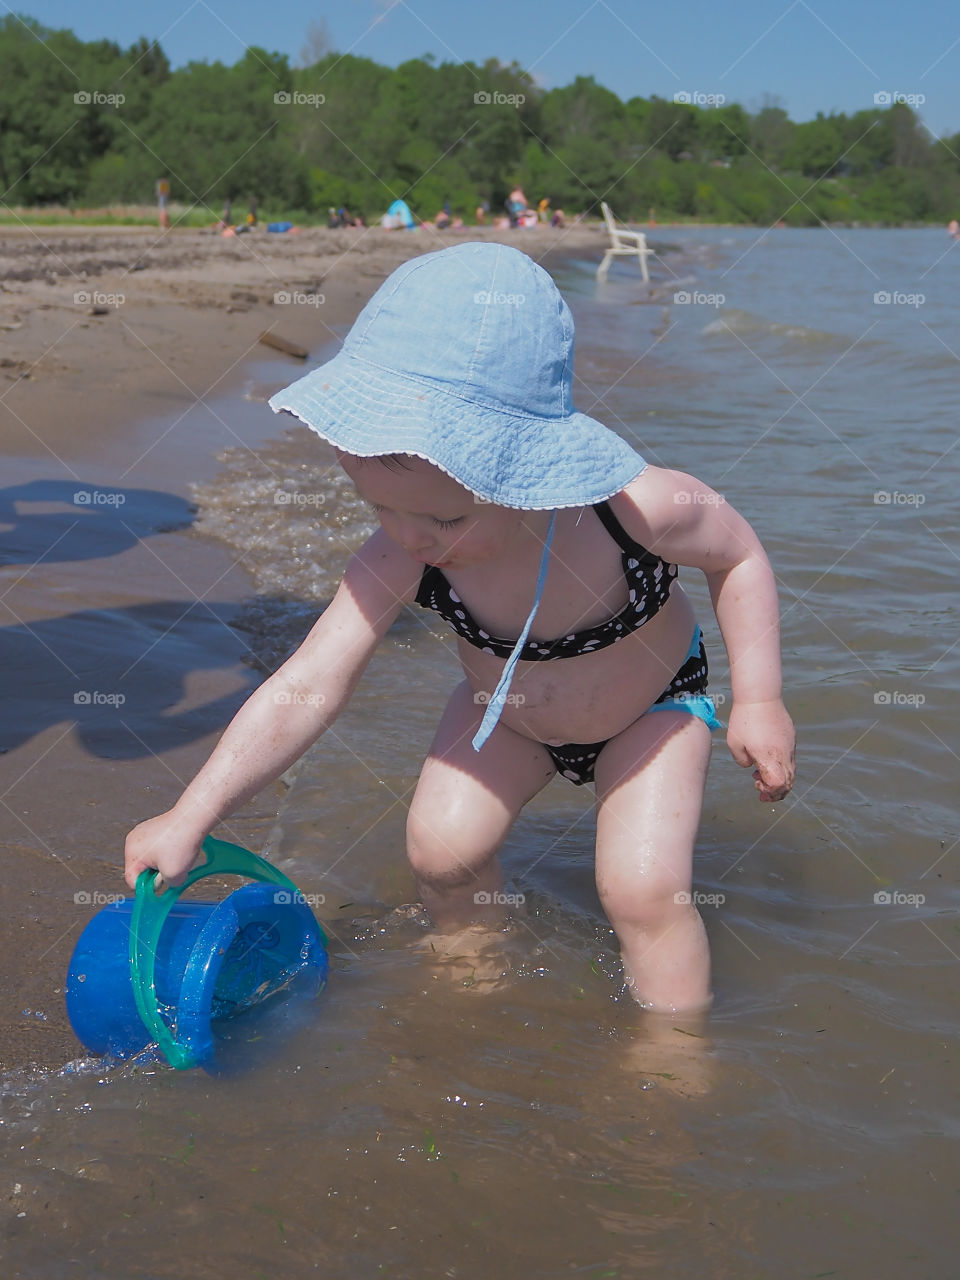 Toddler girl filling her blue bucket with water at the beach.